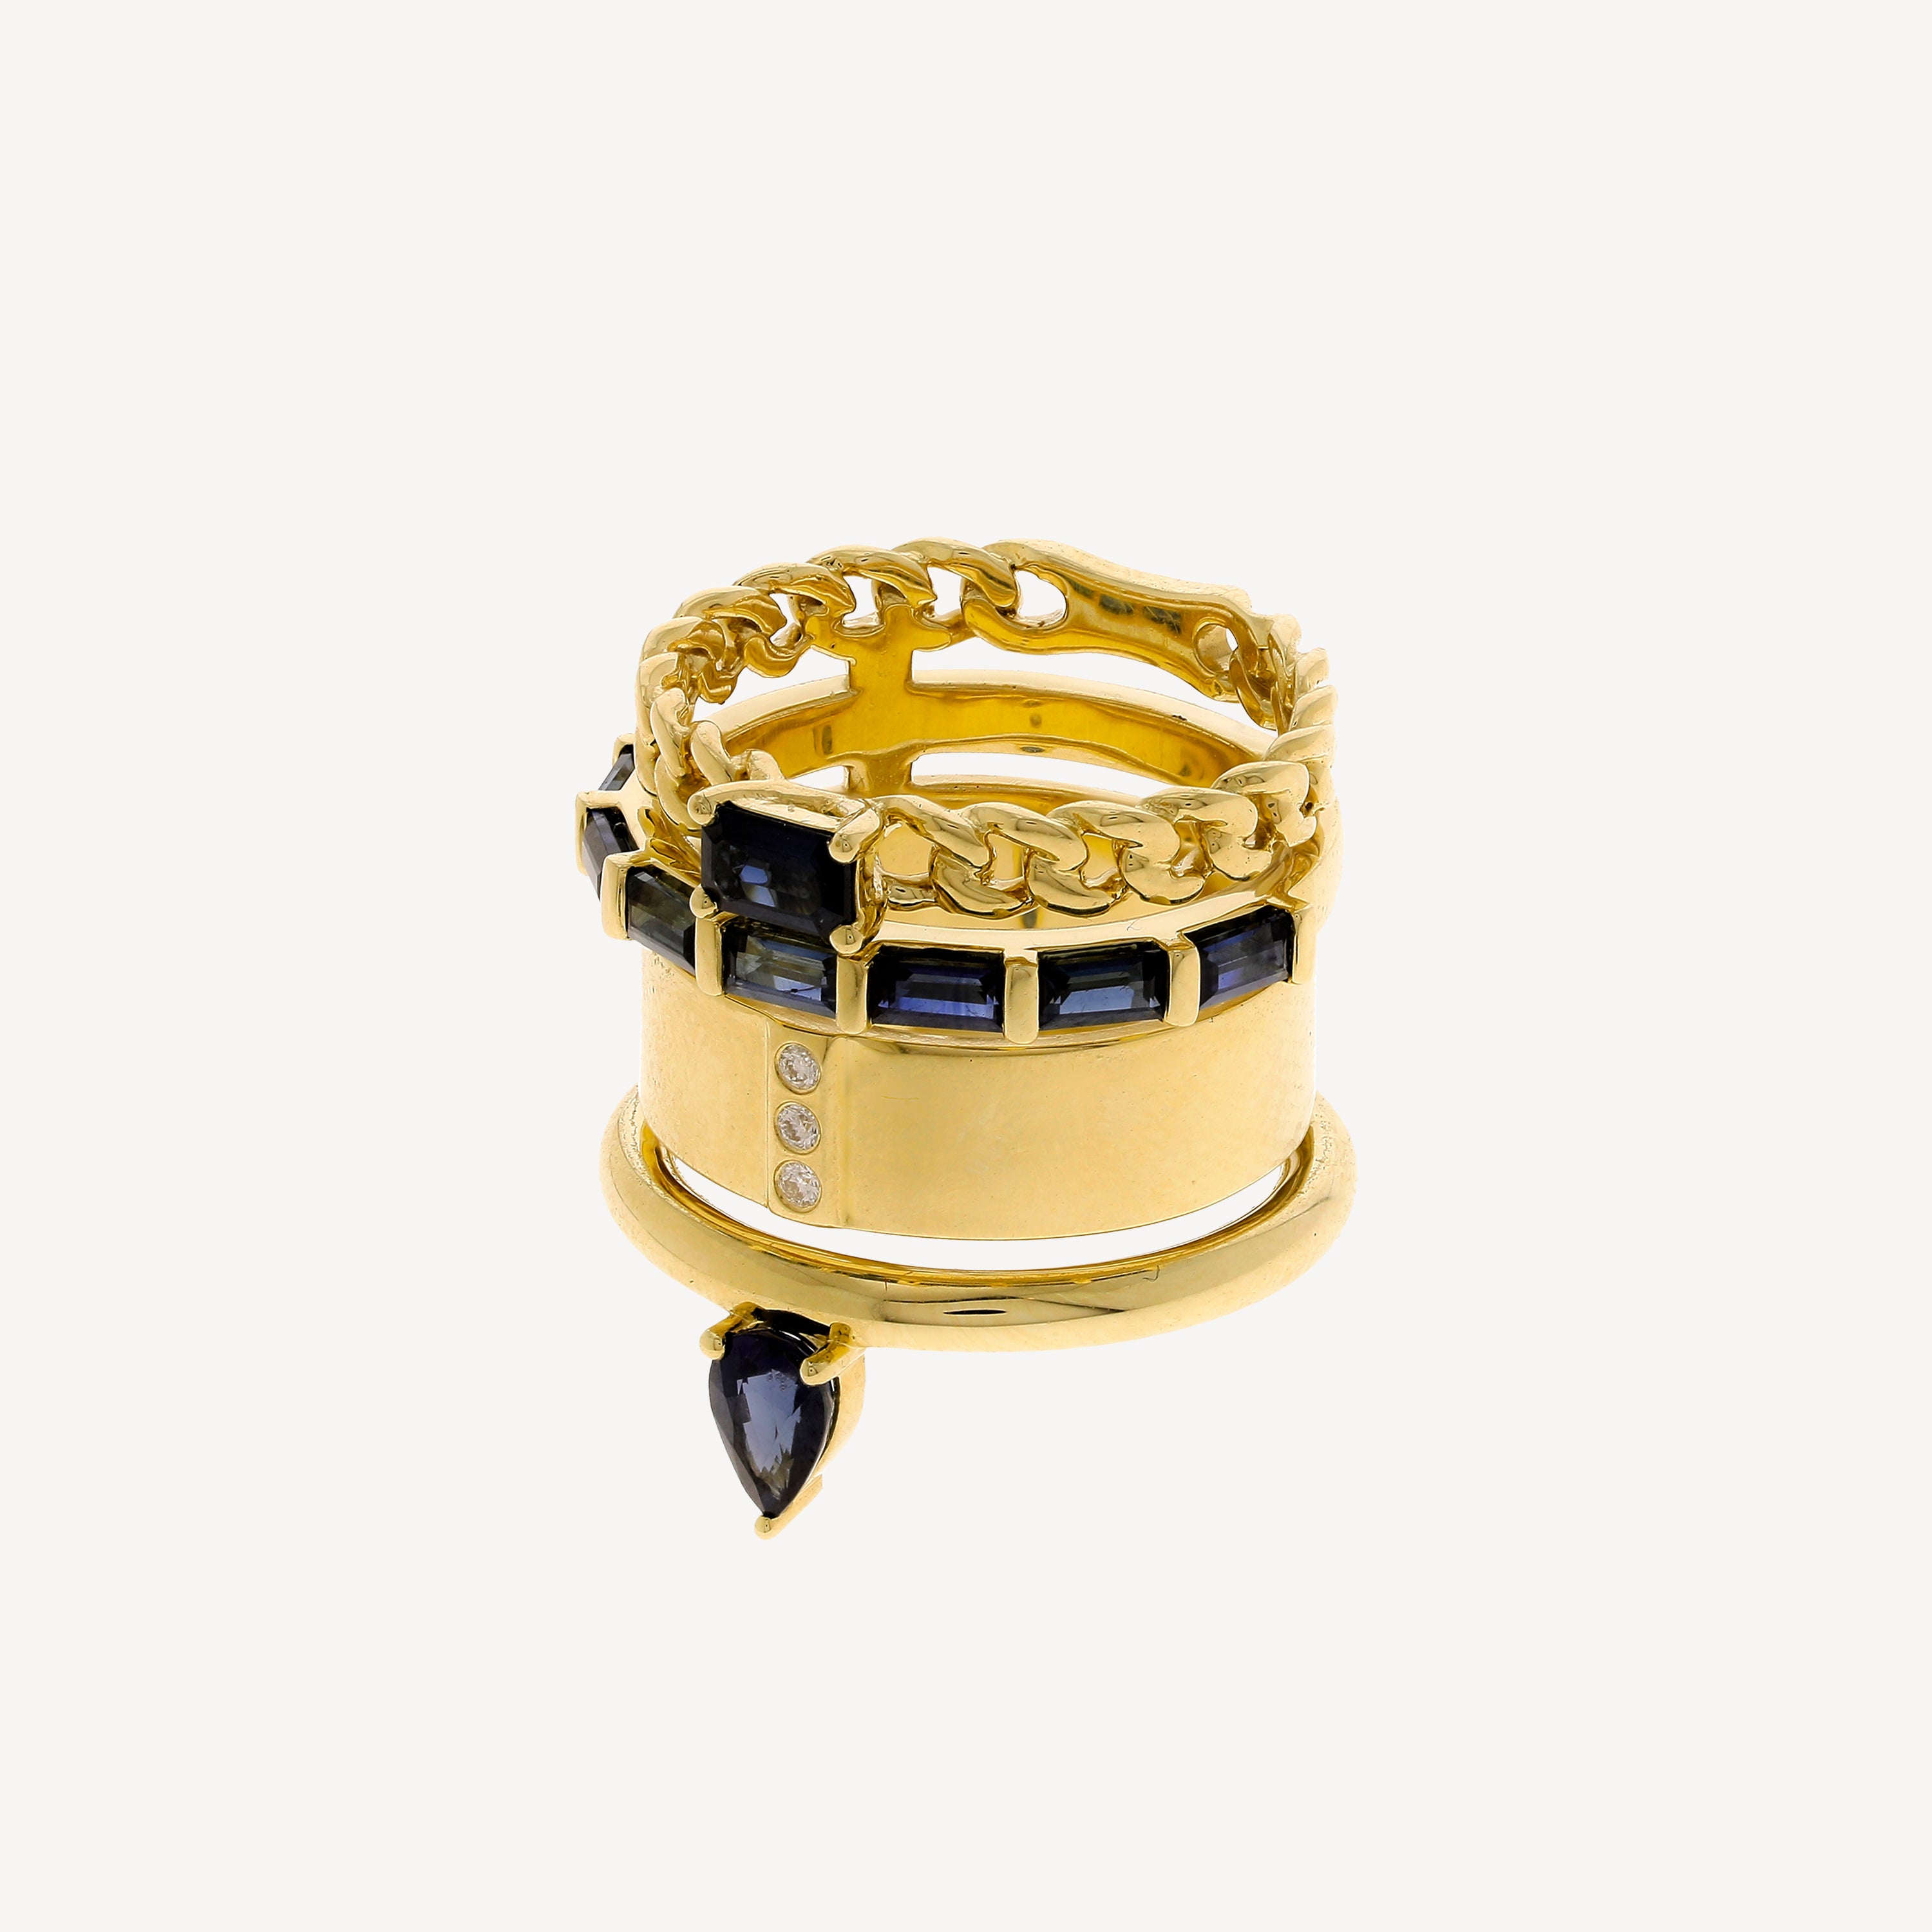 The Type Stack Blue and White Sapphires Ring